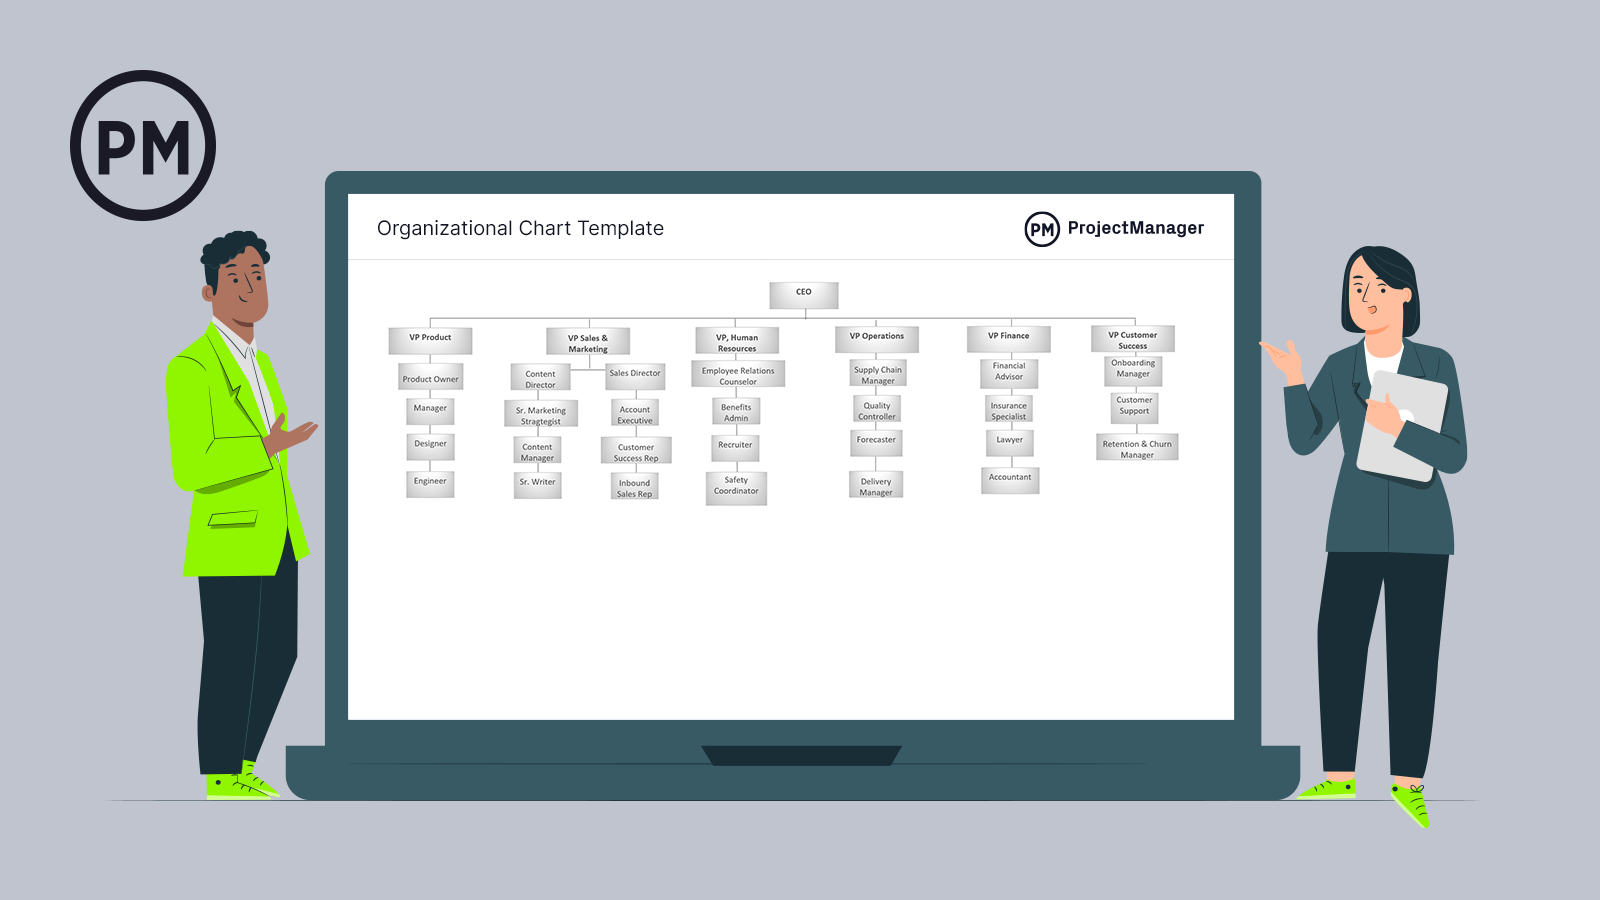 templates for organizational charts